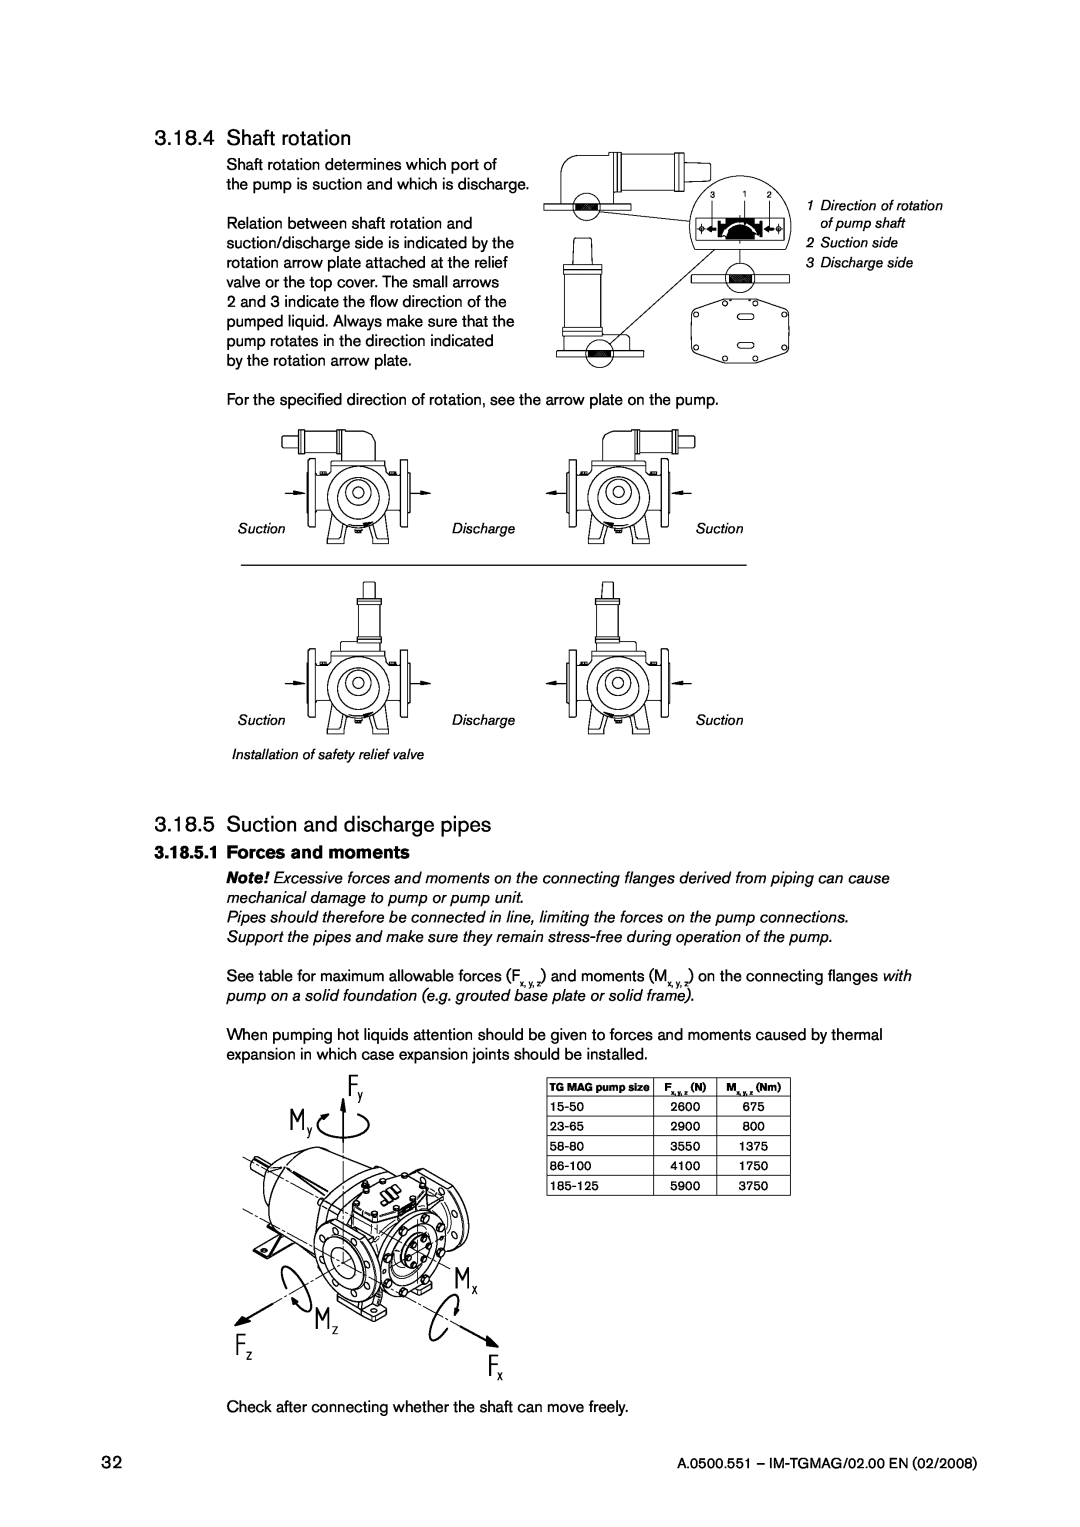 SPX Cooling Technologies TG MAG58-80, TG MAG15-50 Shaft rotation, Suction and discharge pipes, 3.18.5.1Forces and moments 